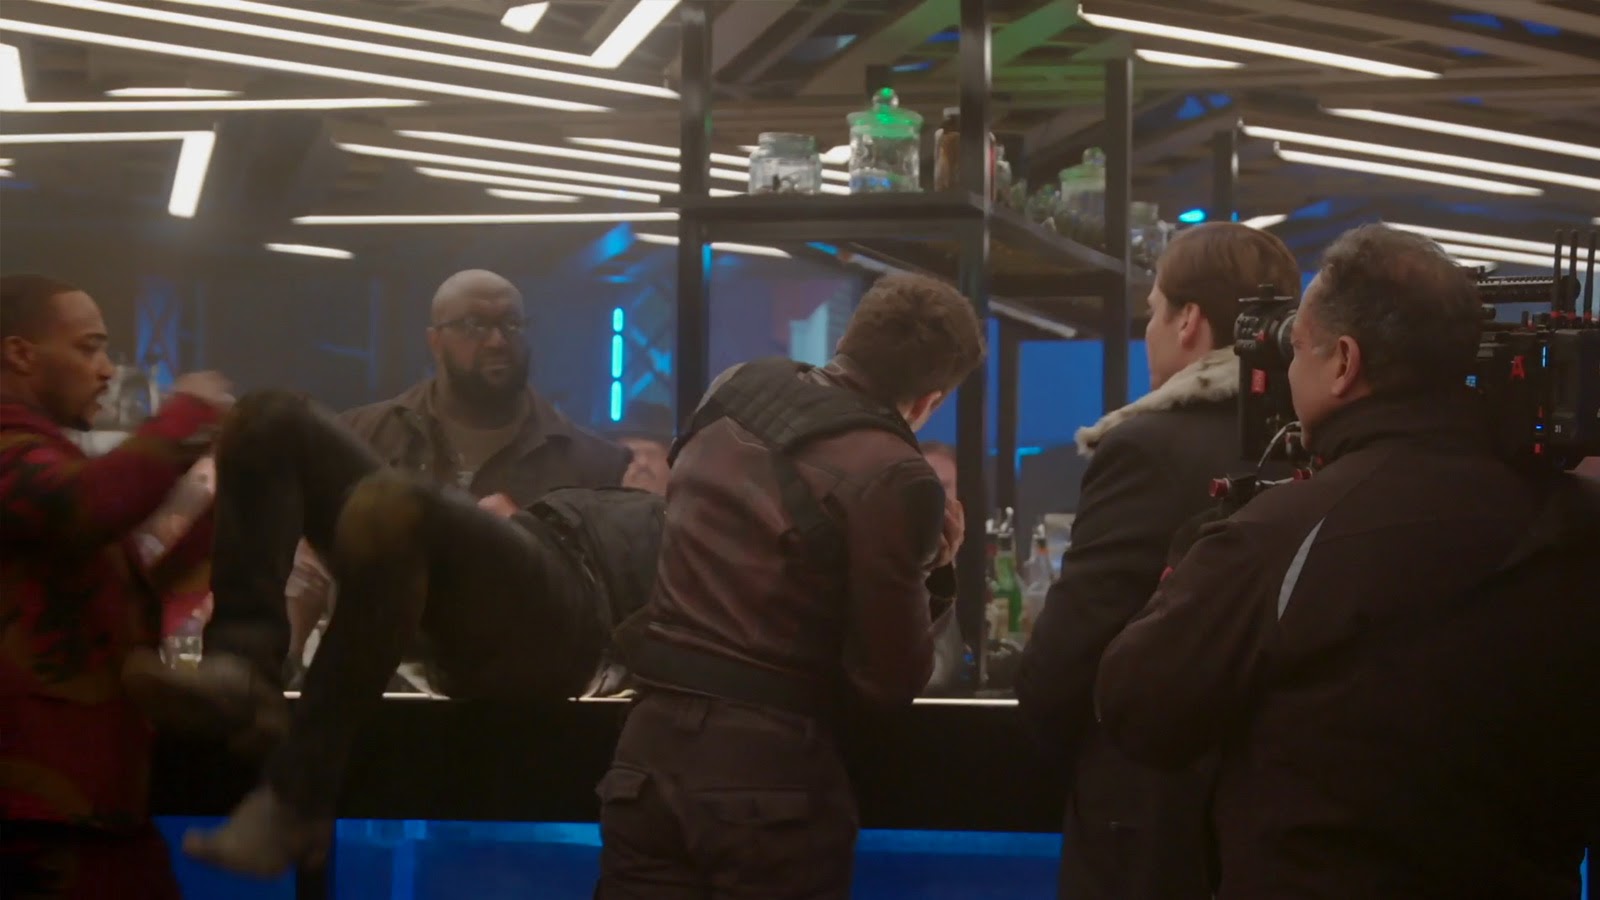 Behind the scenes at the nightclub in The Falcon and The Winter Soldier 